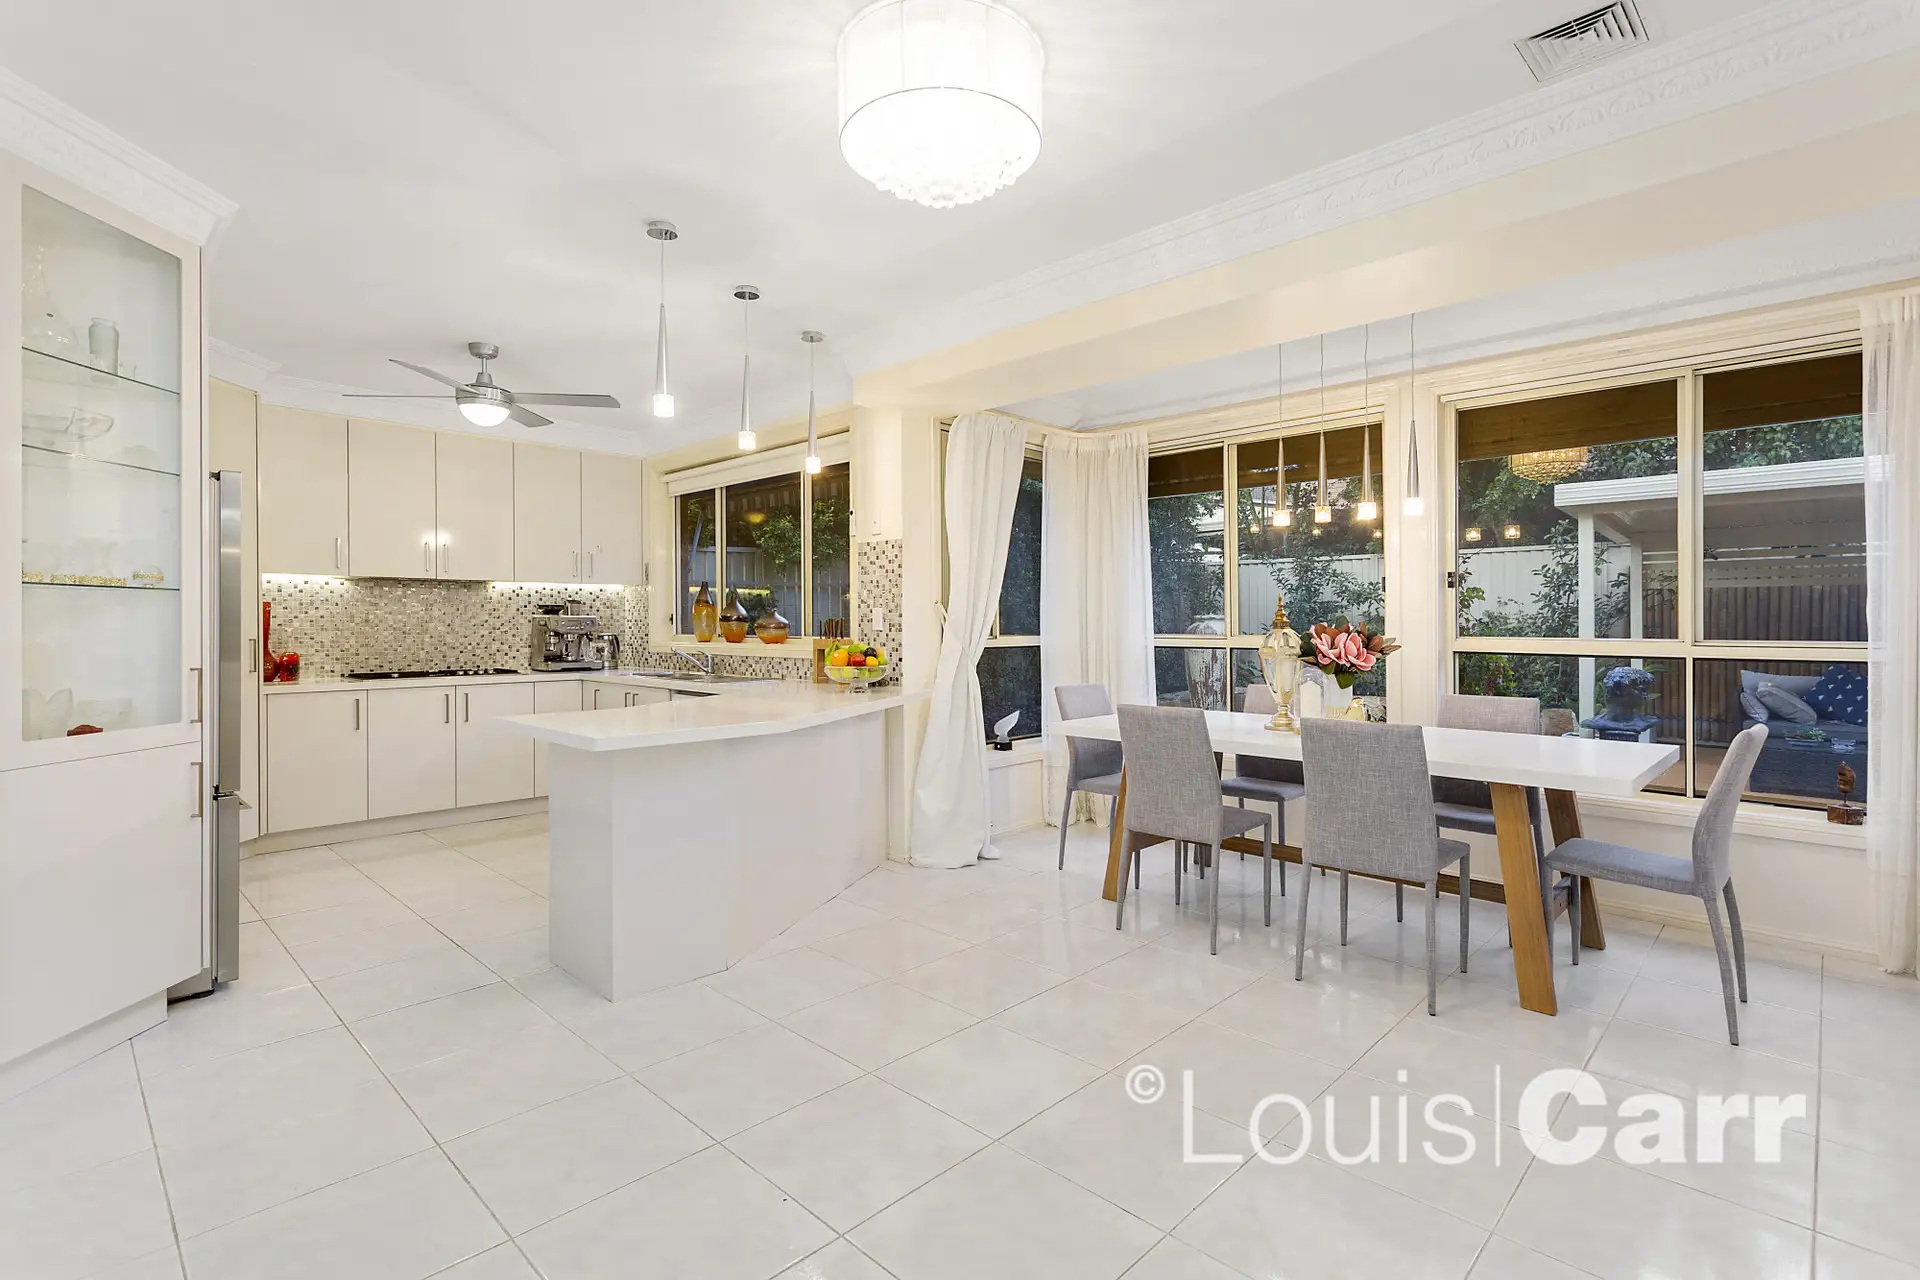 21 Beaumont Drive, Beaumont Hills Sold by Louis Carr Real Estate - image 3